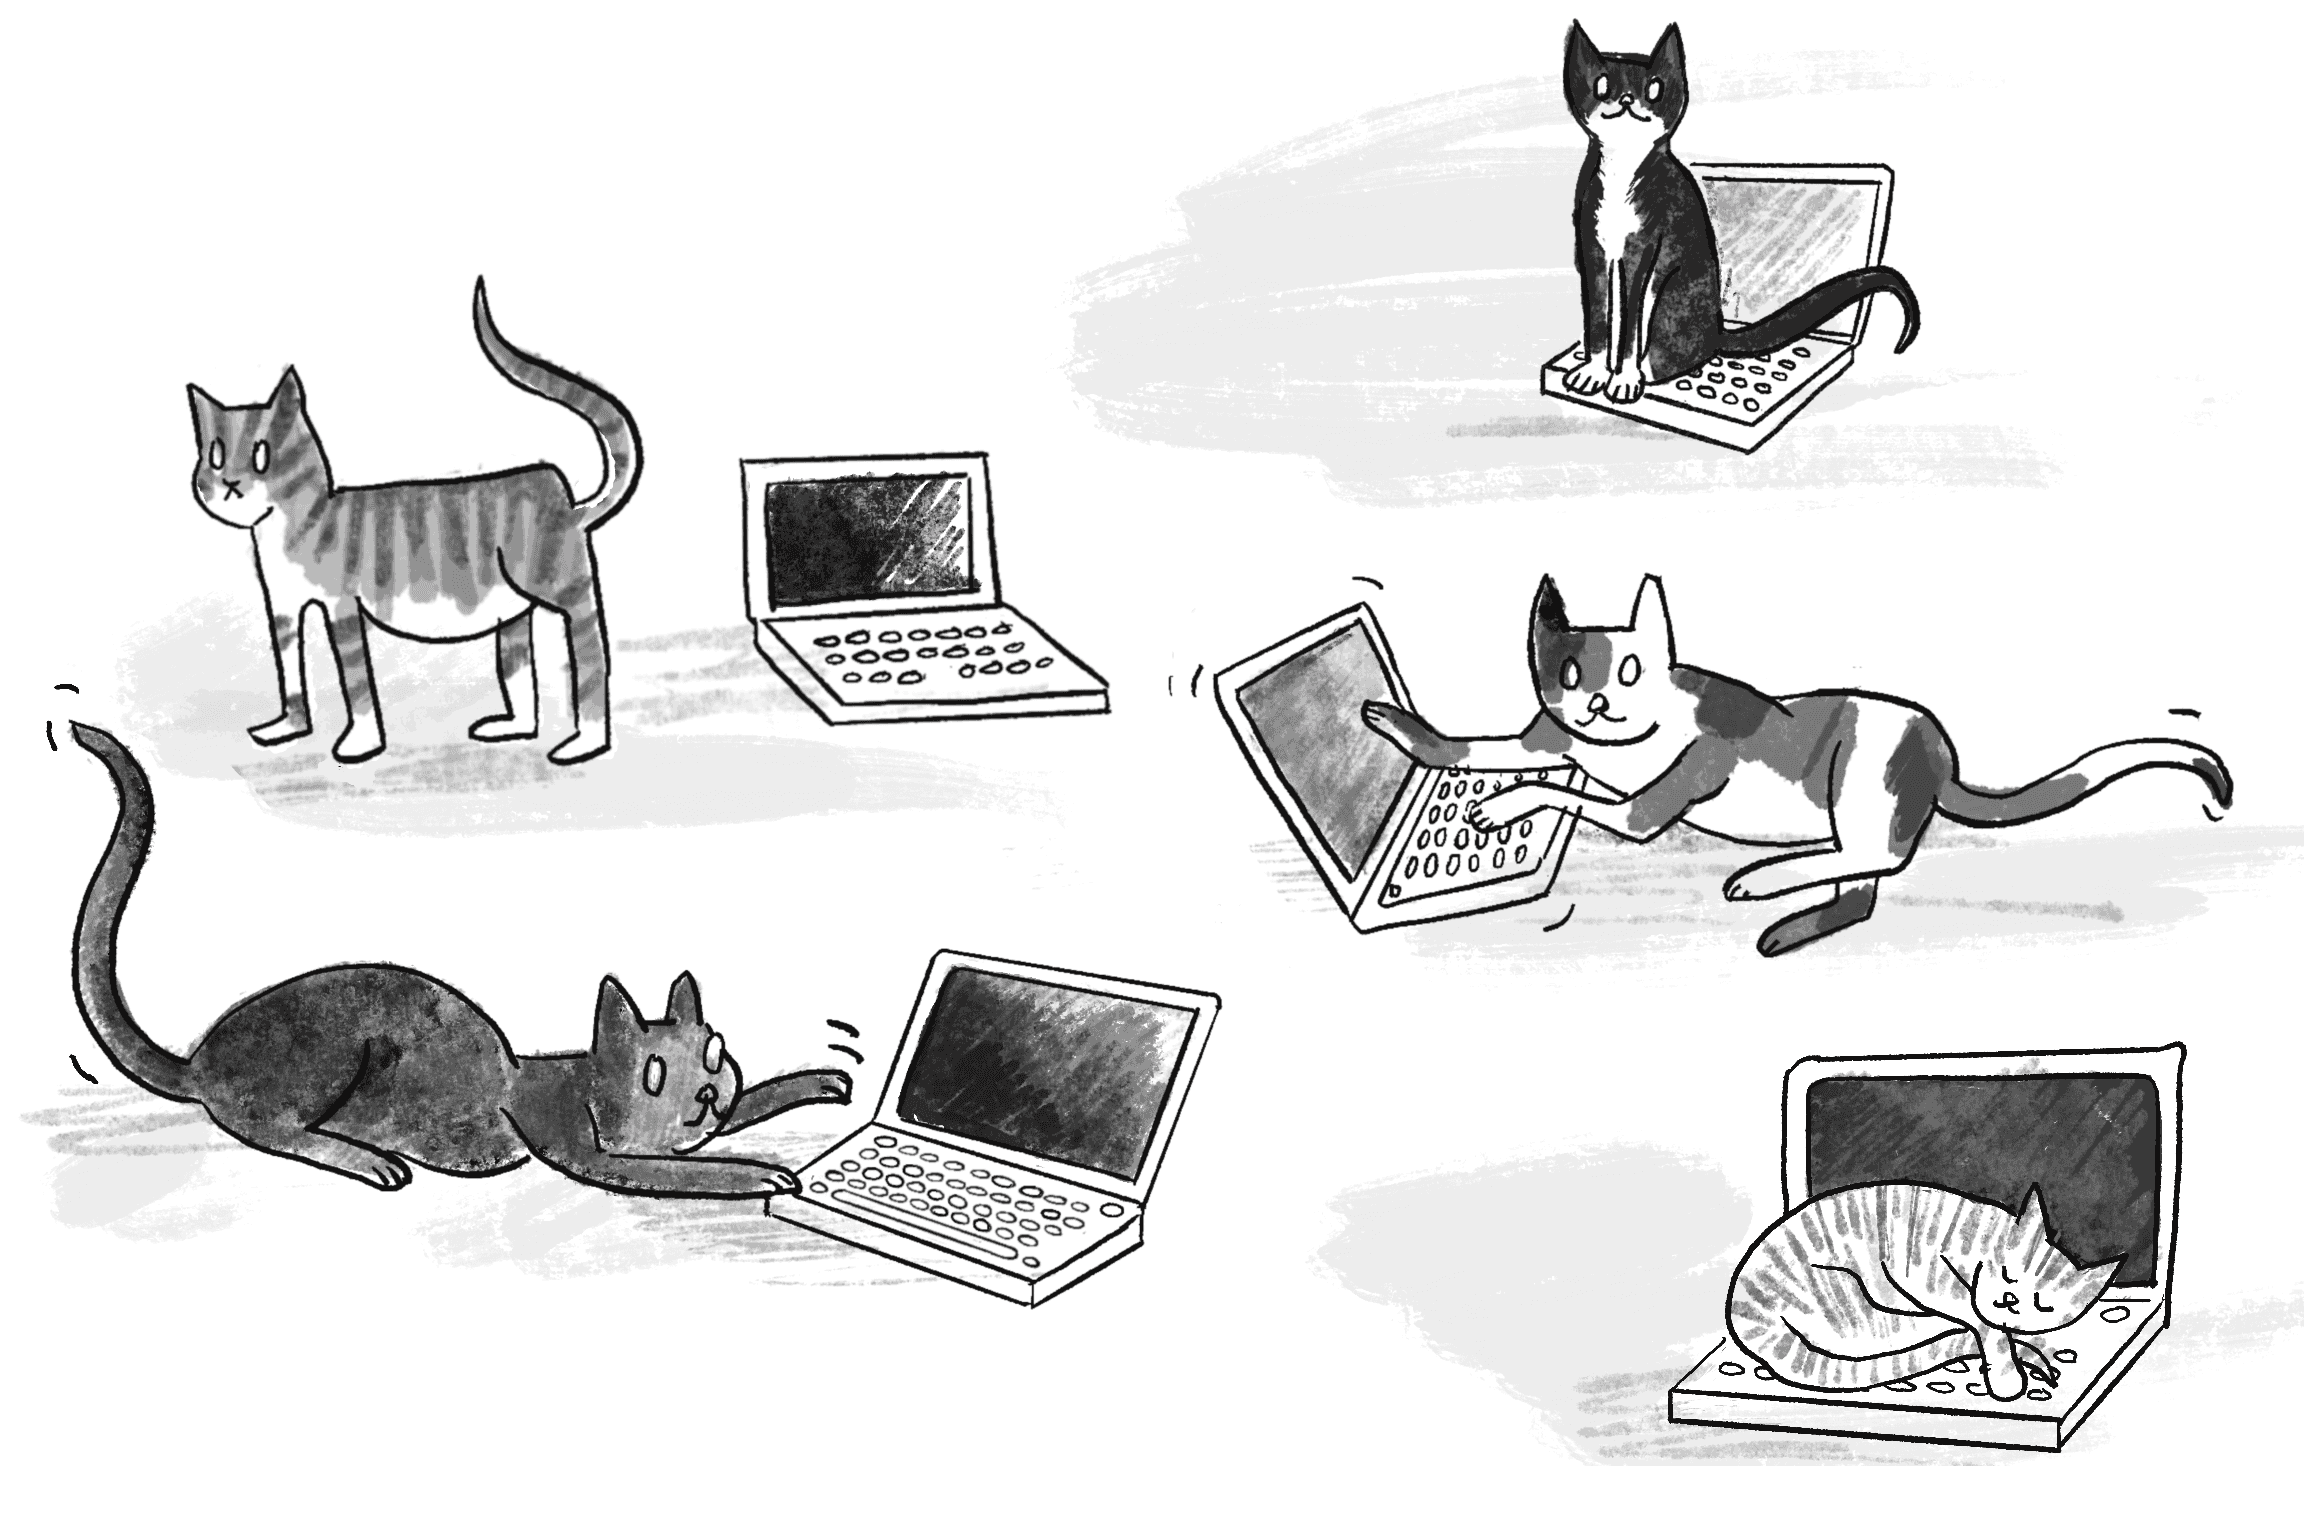 Figure 9.1: Infinite cats typing at infinite keyboards